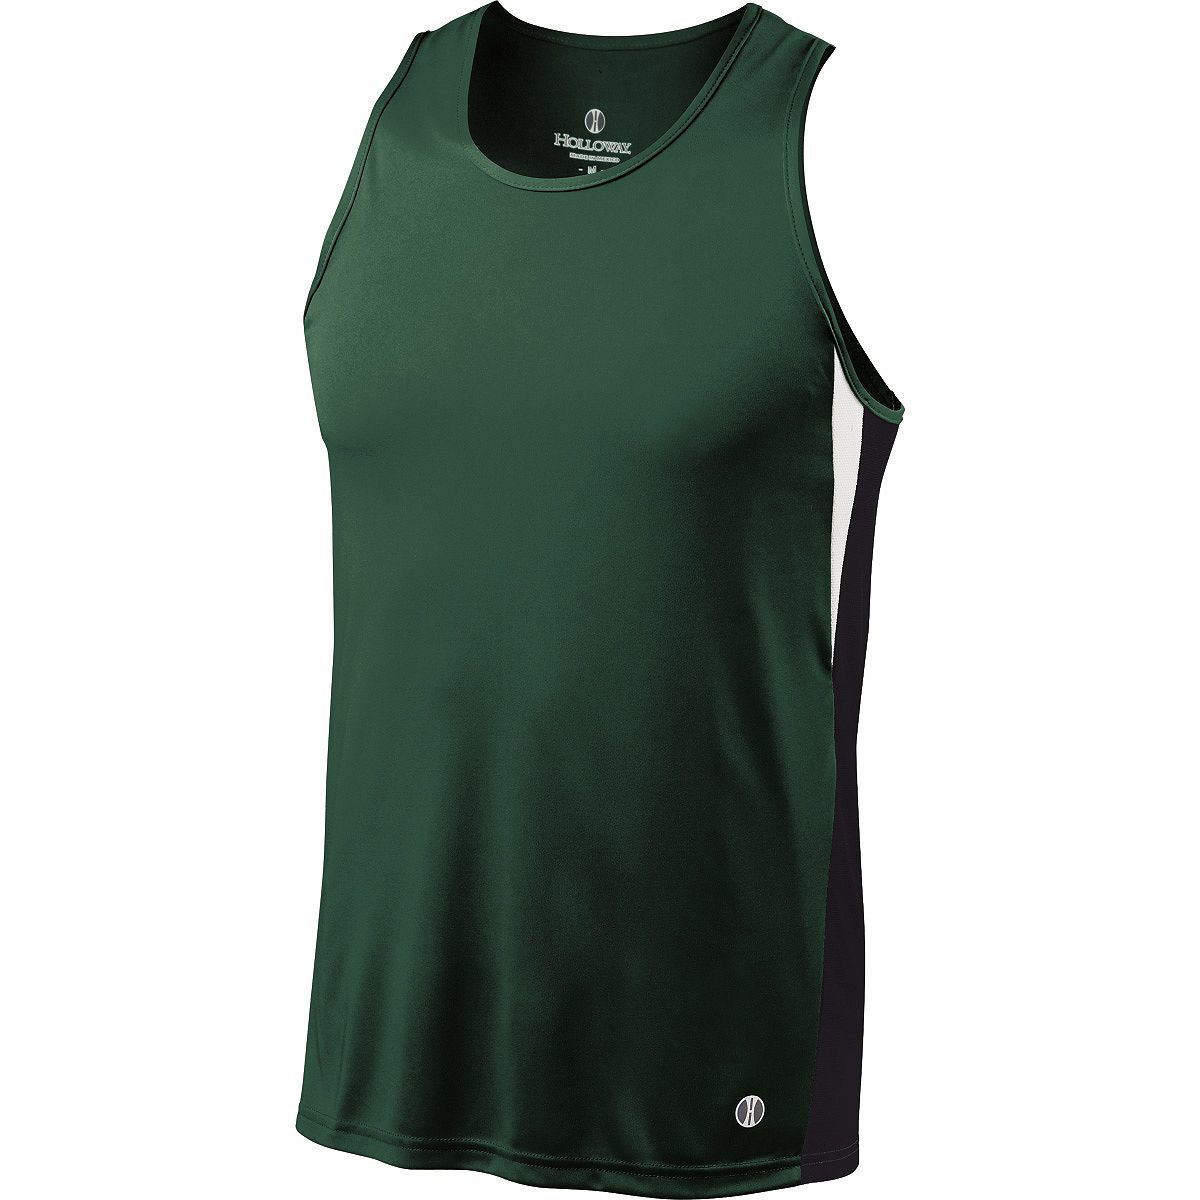 Holloway Vertical Singlet in Forest/Black/White  -Part of the Adult, Track-Field, Holloway, Shirts product lines at KanaleyCreations.com